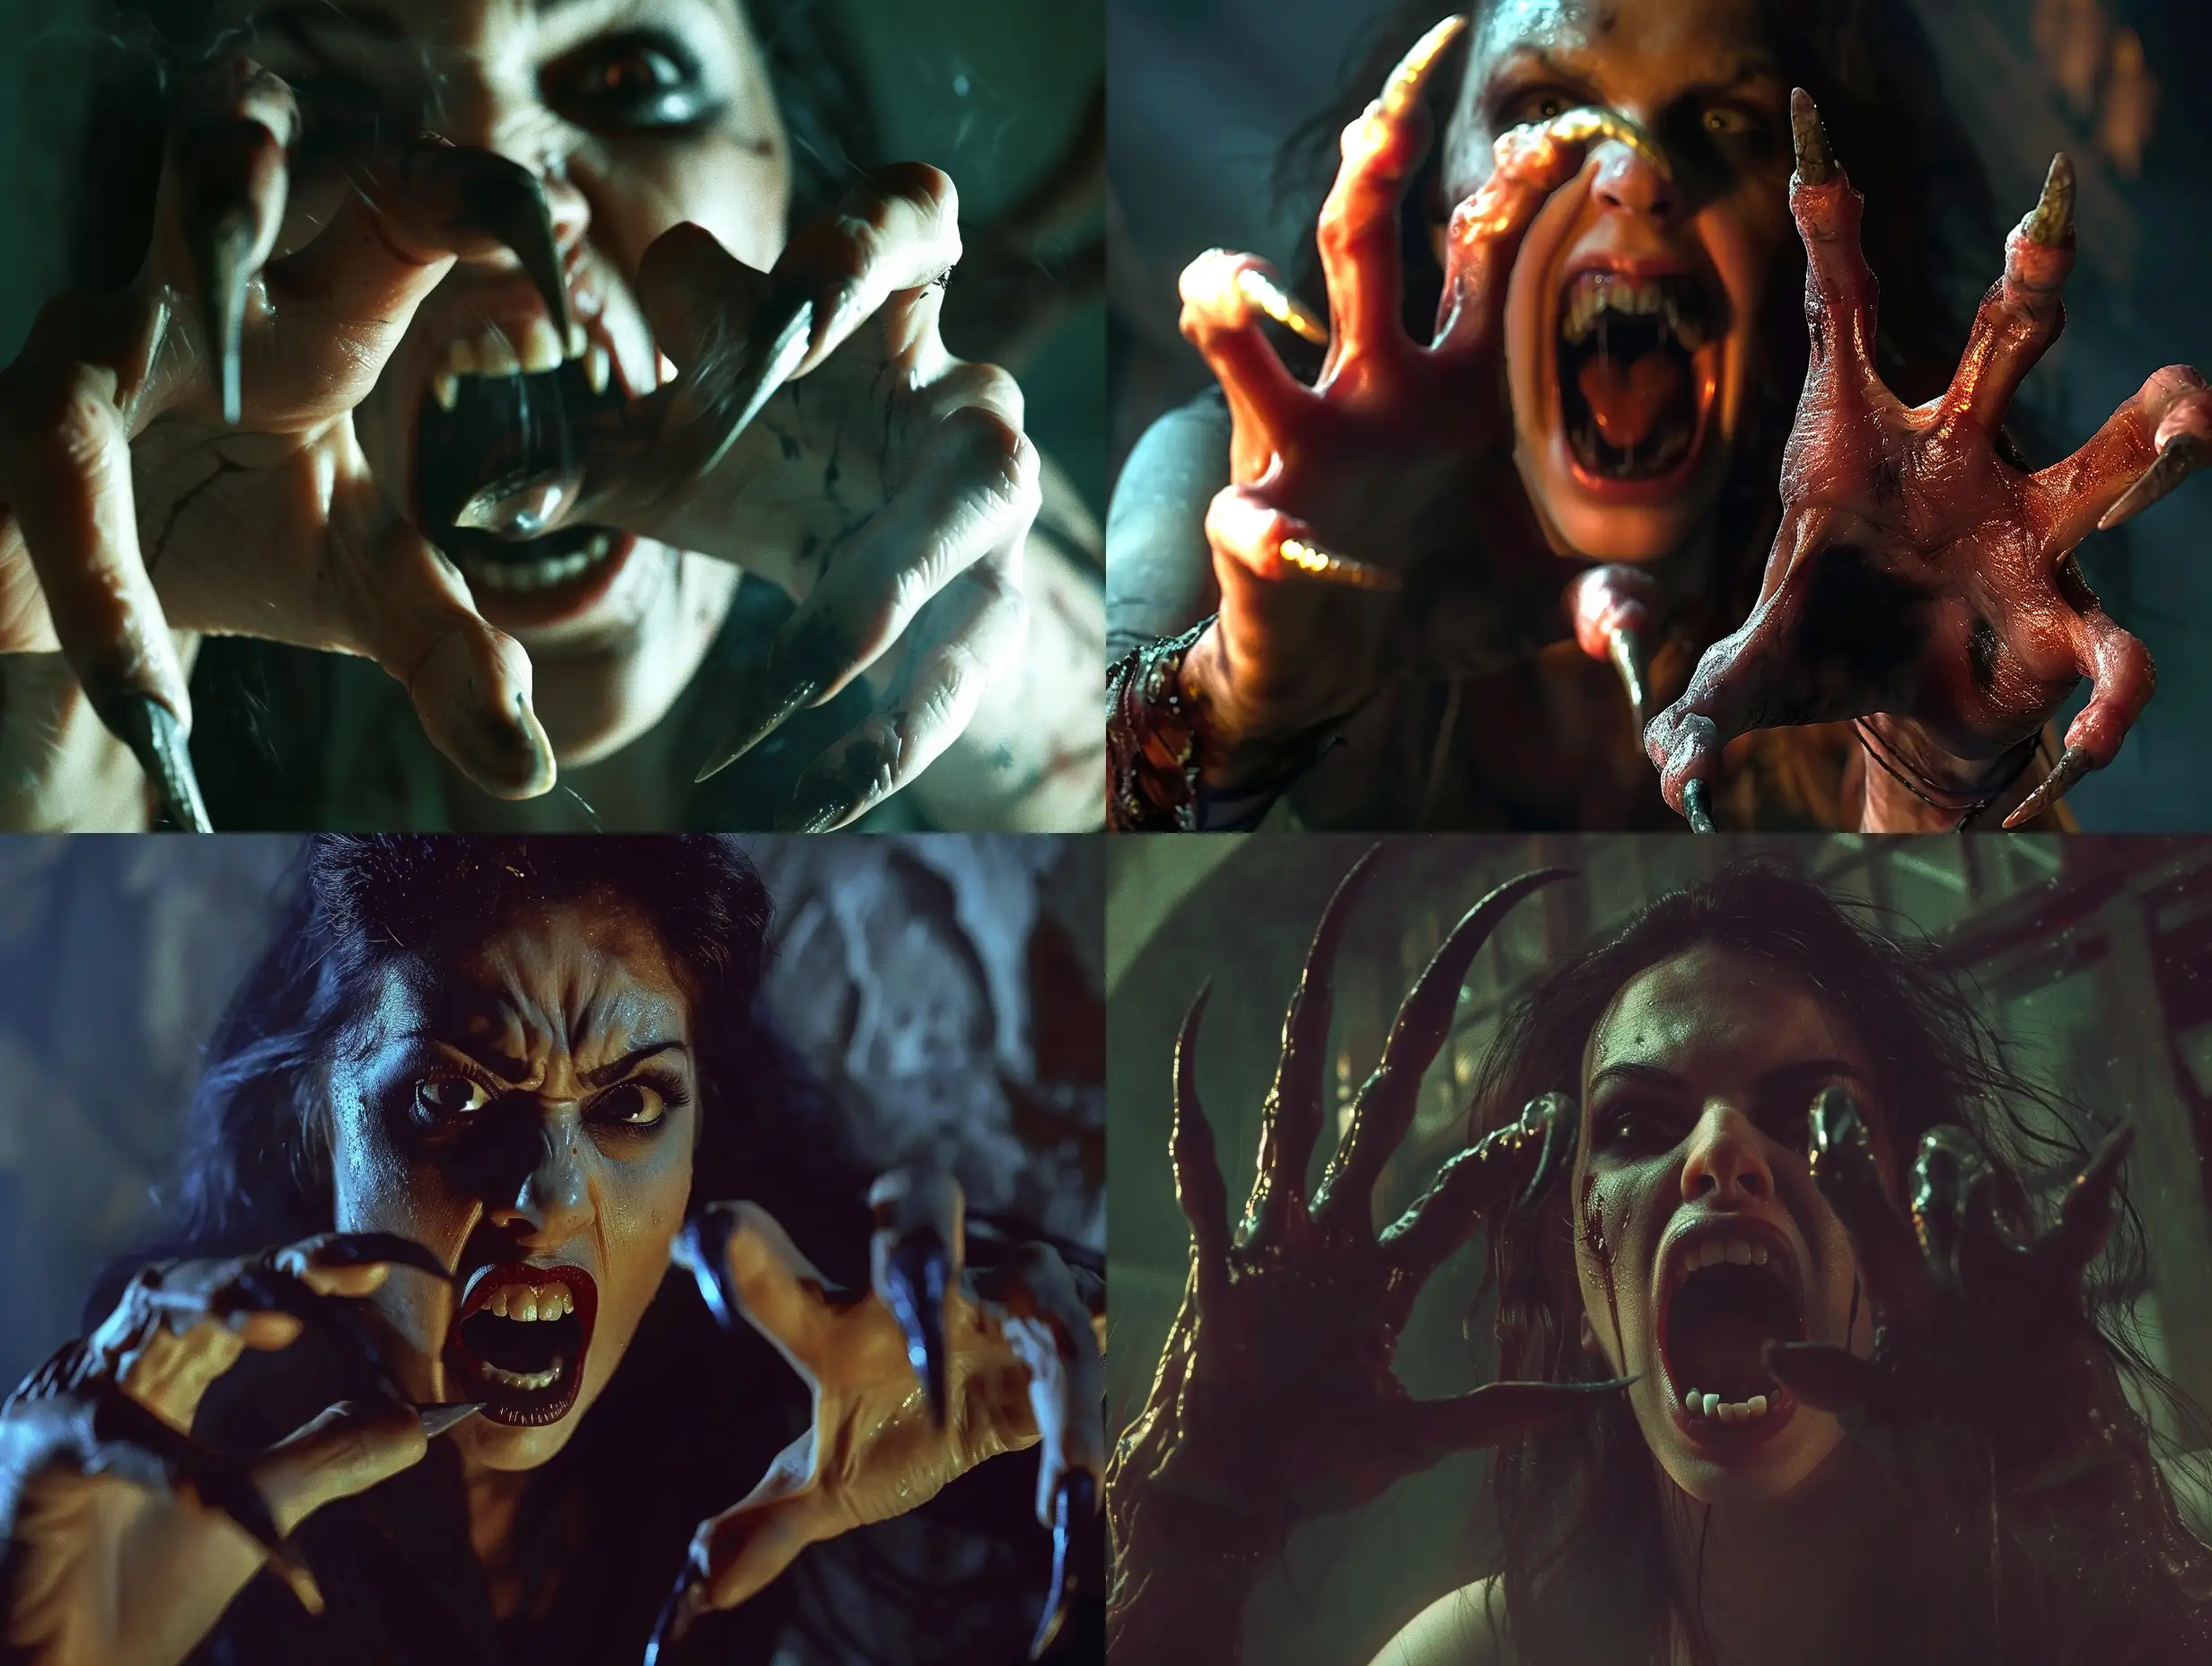 A photorealistic scene of a wild vampire woman with extra long pointed fingernails, on each hand with five fingers, her mouth is threateningly open, and her teeth look like fangs. The vampire looks like she emerged from the depths of the earth, her nails resembling the claws of a predator. The scene takes place inside a dimly lit room, exuding a hyper-realistic and cinematic quality with high attention to detail. The atmosphere is dark and intense, with haunting and atmospheric lighting that emphasizes the smallest details. The vampire's appearance is aggressive and realistic, evoking a sense of horror and unease. The overall scene is detailed, textured, and exudes a sense of eerie realism. The focus is on creating a night-time setting that feels both spooky and terrifying, with a full anatomical representation that captures the essence of an undead creature. The goal is to achieve photorealism with clear, flawless human hands featuring five fingers